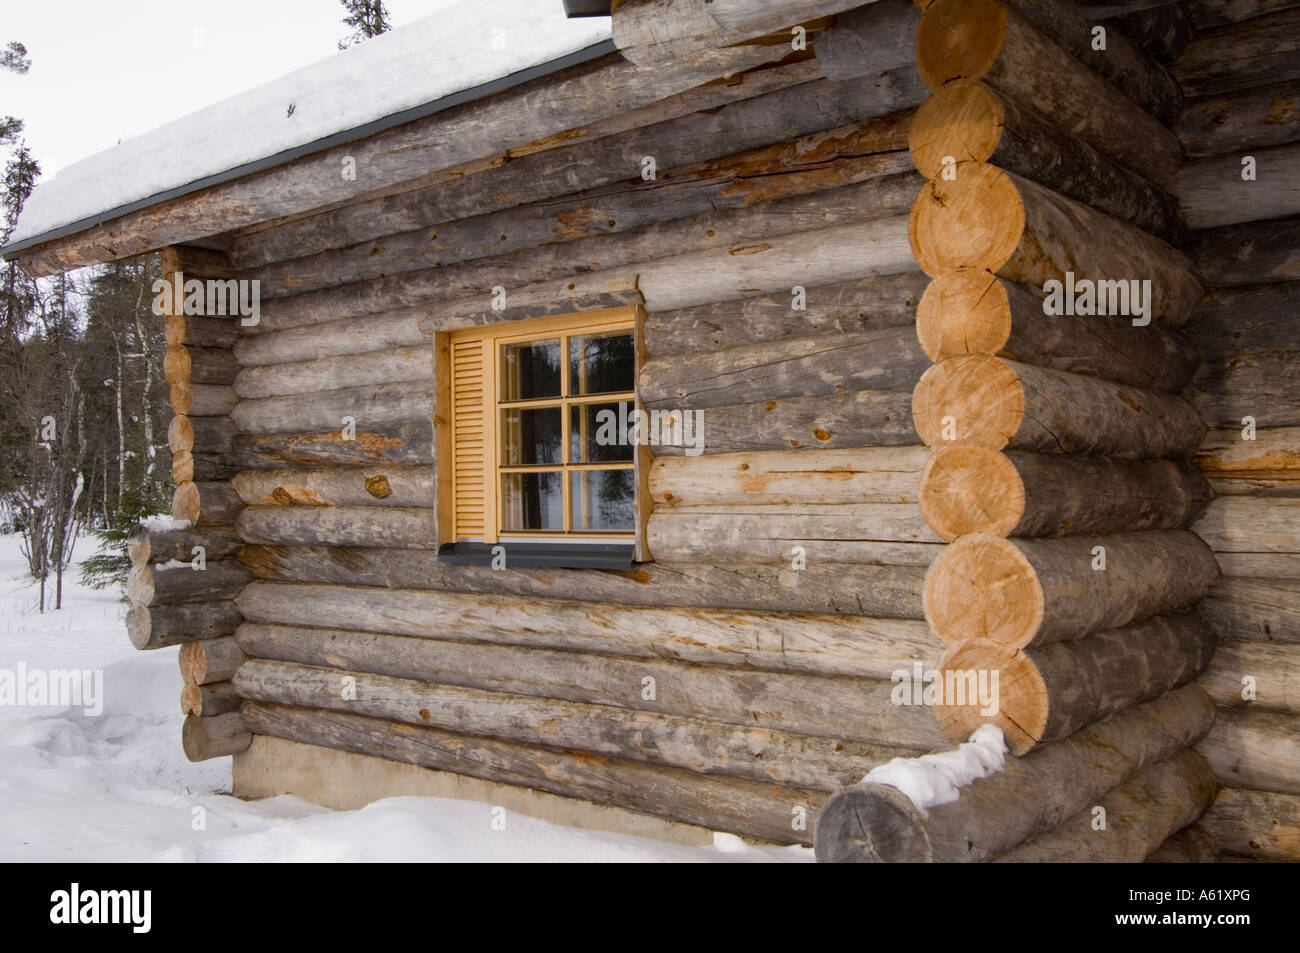 View of a traditional log cabin, Luosto, Lapland, Northern Finland, Europe, Arctic Stock Photo